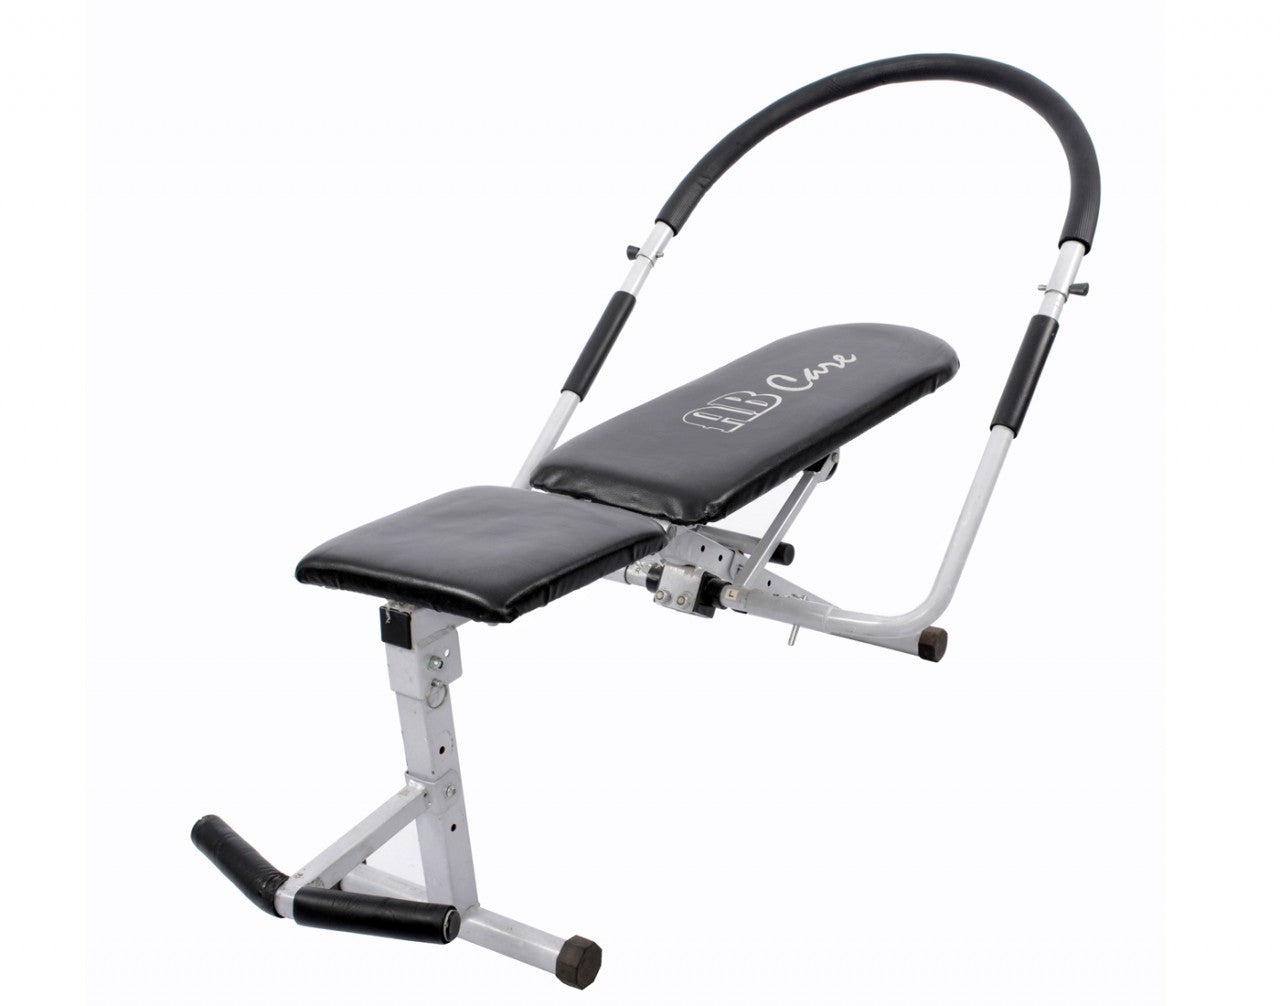 LifeLine Fitness AB Care Exercise Bench with 5 in 1 Resistance Band